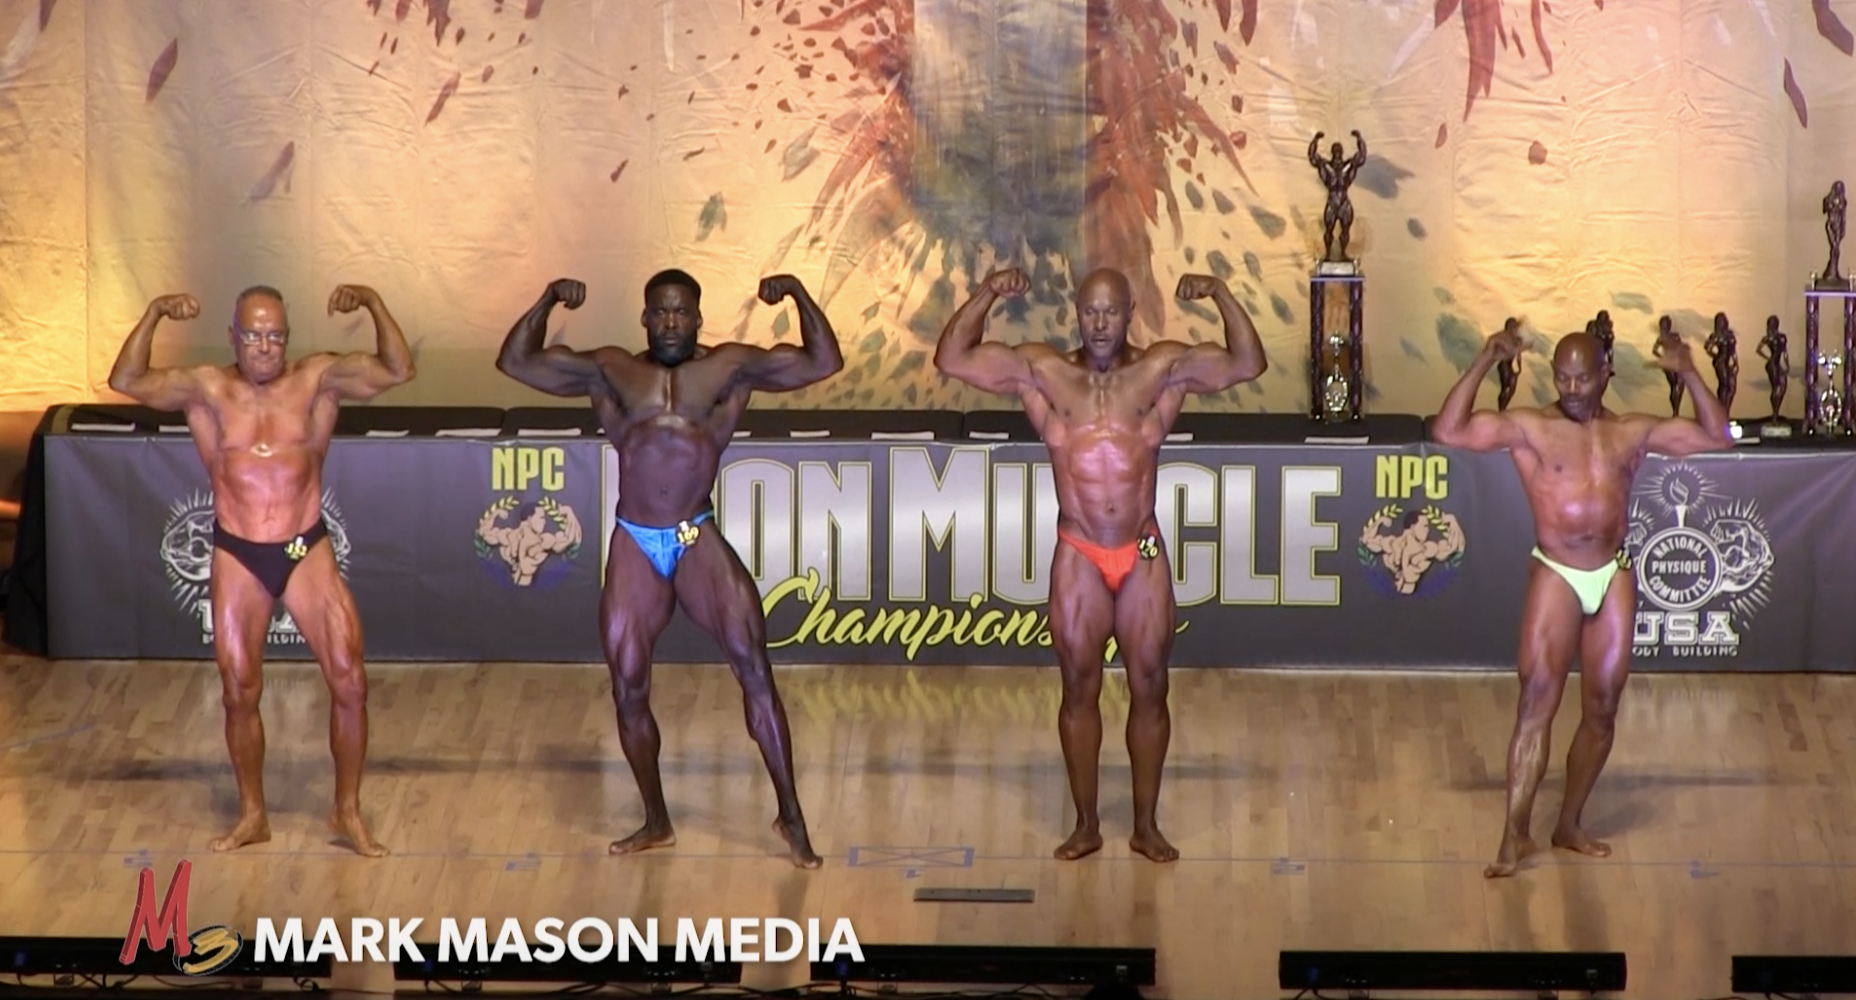 2017 NPC IRON MUSCLE CHAMPIONSHIPS BODYBUILDING OPEN OVERALL VIDEO